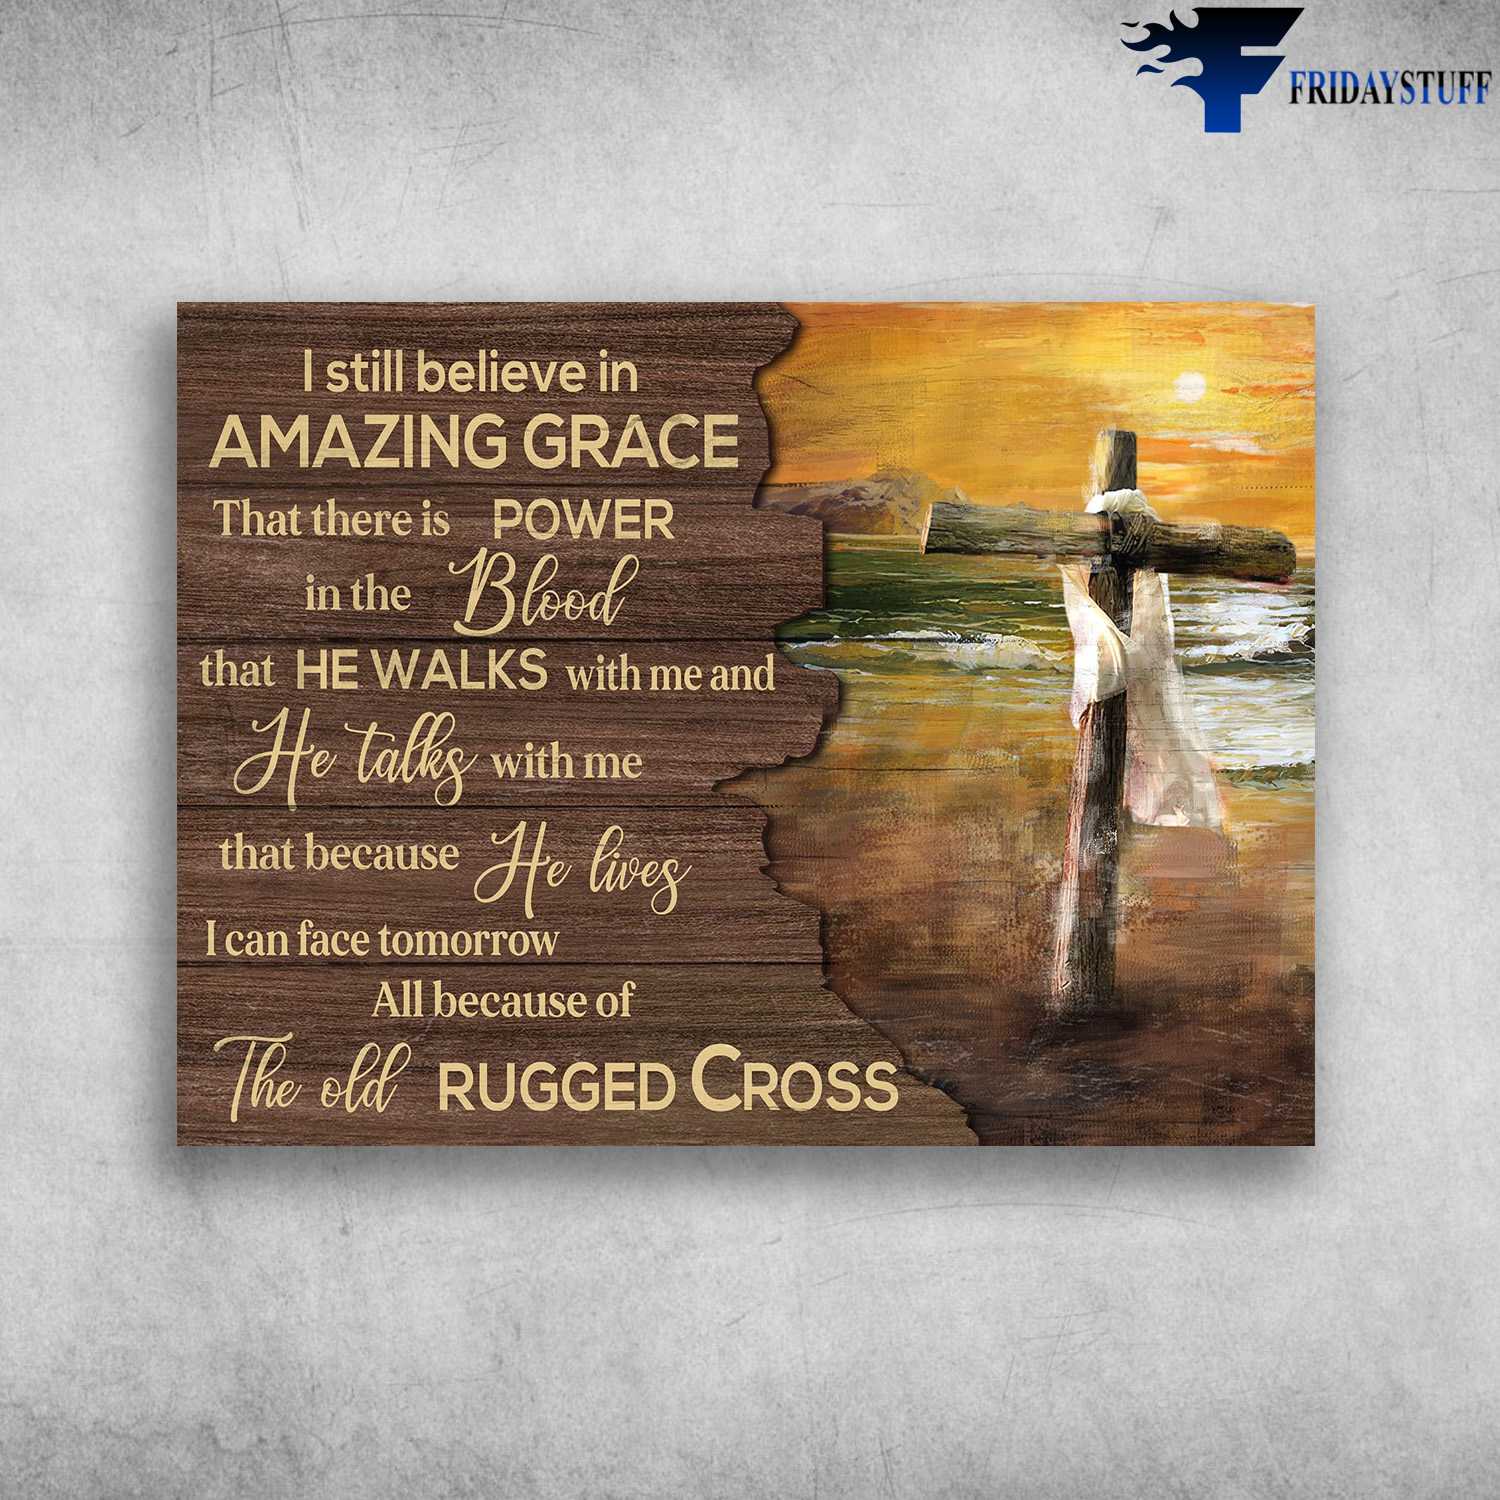 Rugged Cross - I Still Believe In Amazing Grace, That There Is Power In The Blood, That He Walks With Me And He Takks With Me, That Because He Lives